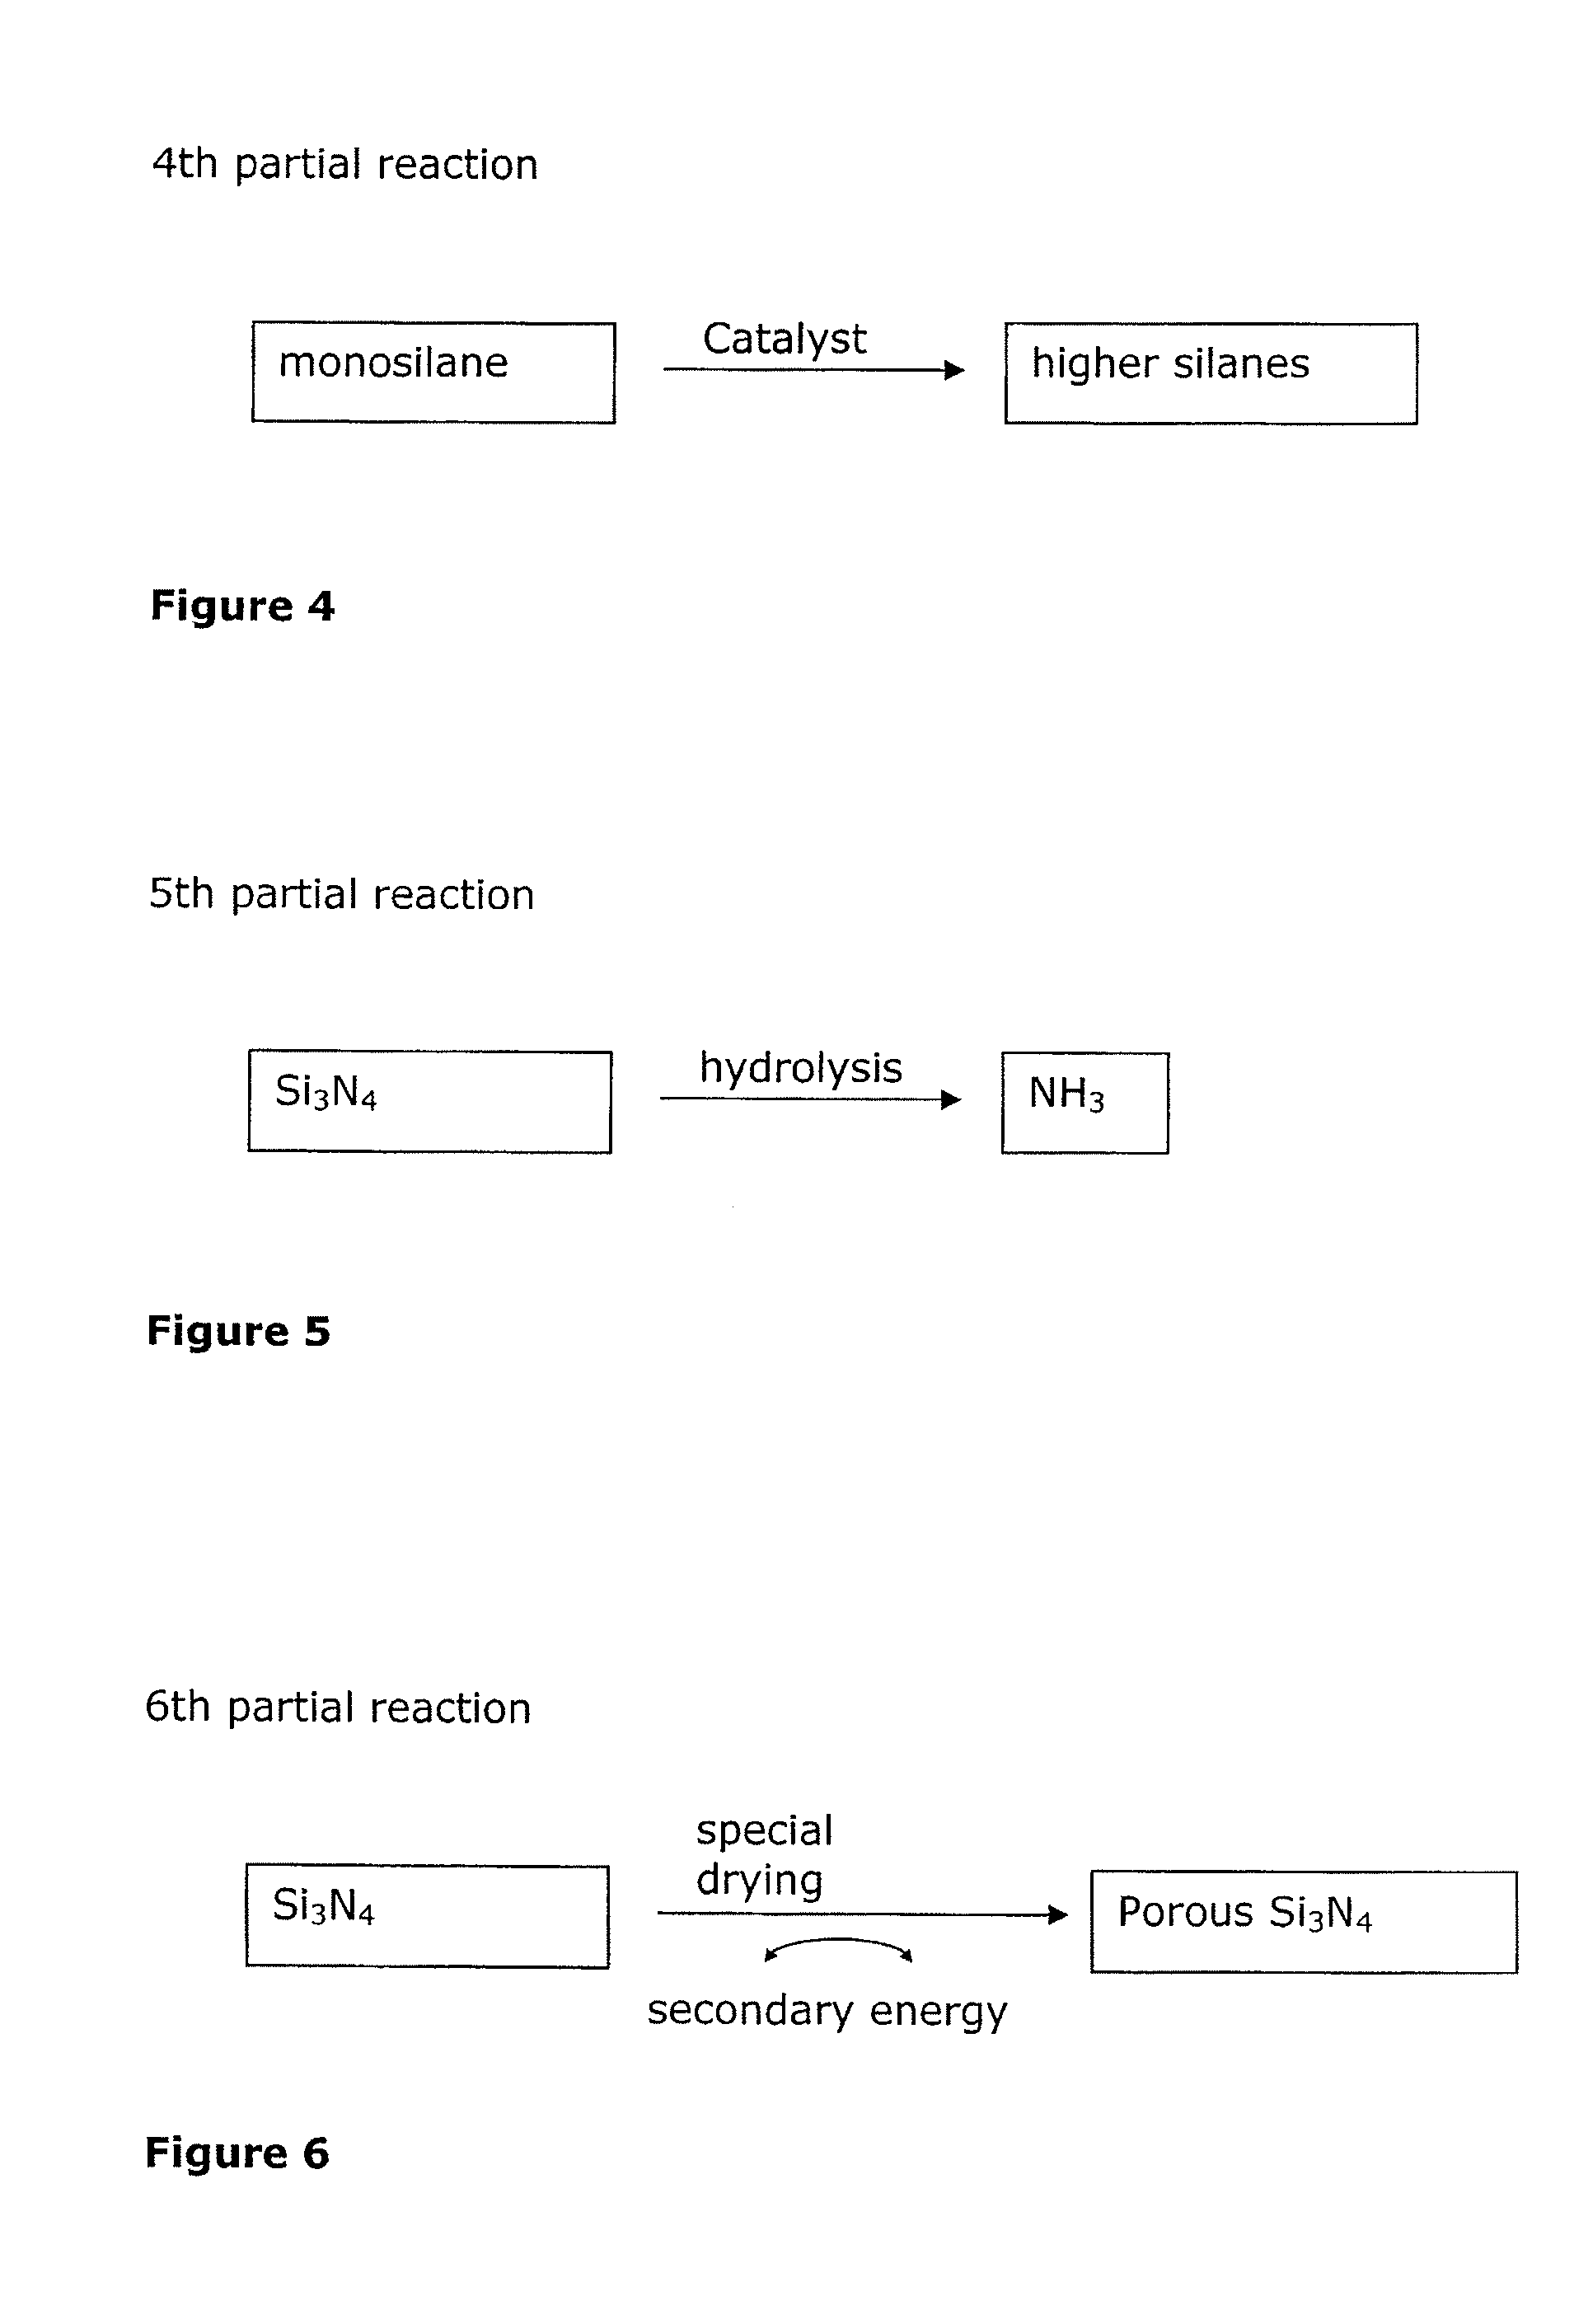 Novel cascaded power plant process and method for providing reversibly usable hydrogen carriers in such a power plant process